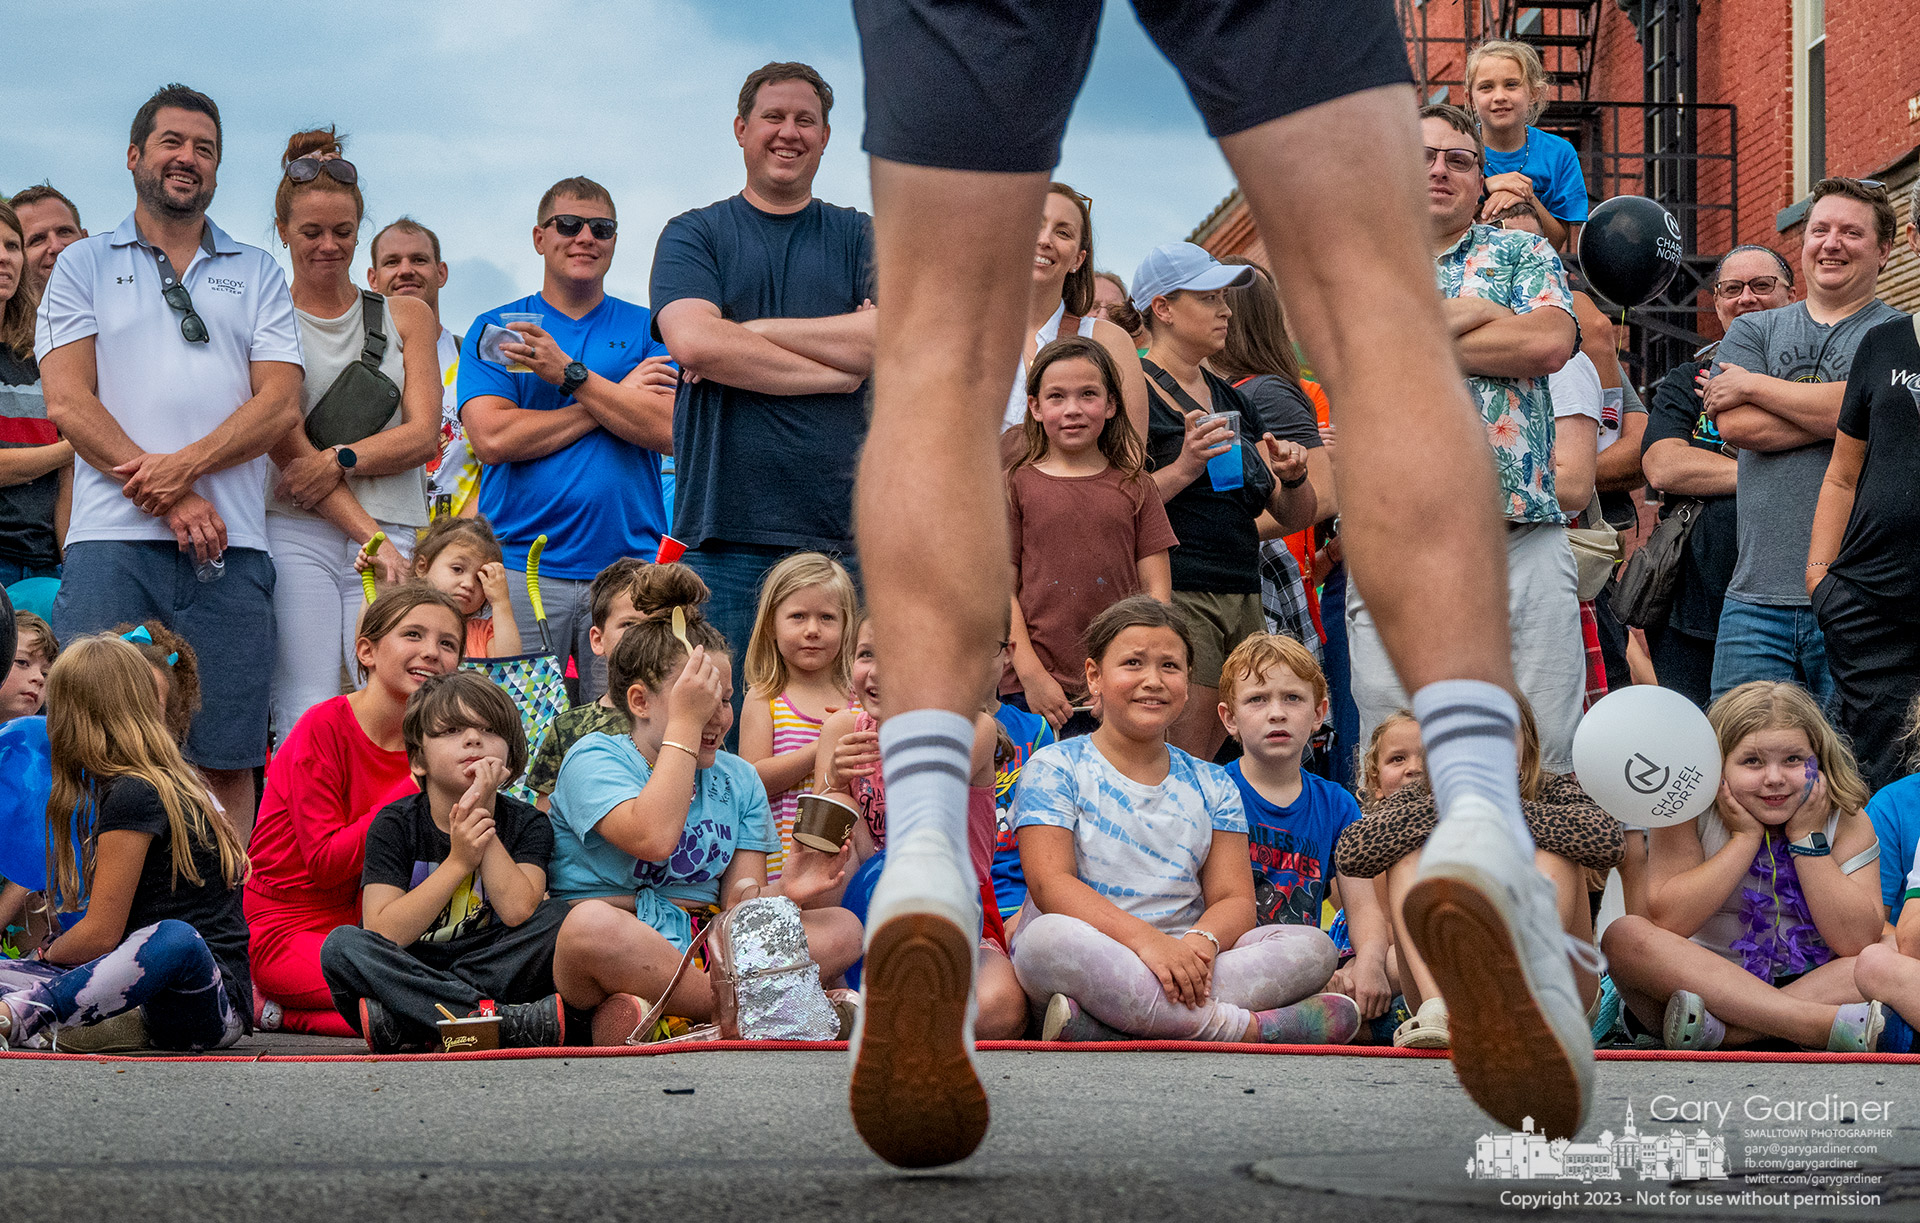 Adults and children react as a juggling contortionist passes an open-face tennis racket over his chest and shoulders warning them that he will have to dislocate his shoulder to accomplish the stunt during Fourth Friday in Uptown Westerville. My Final Photo for June 23, 2023.